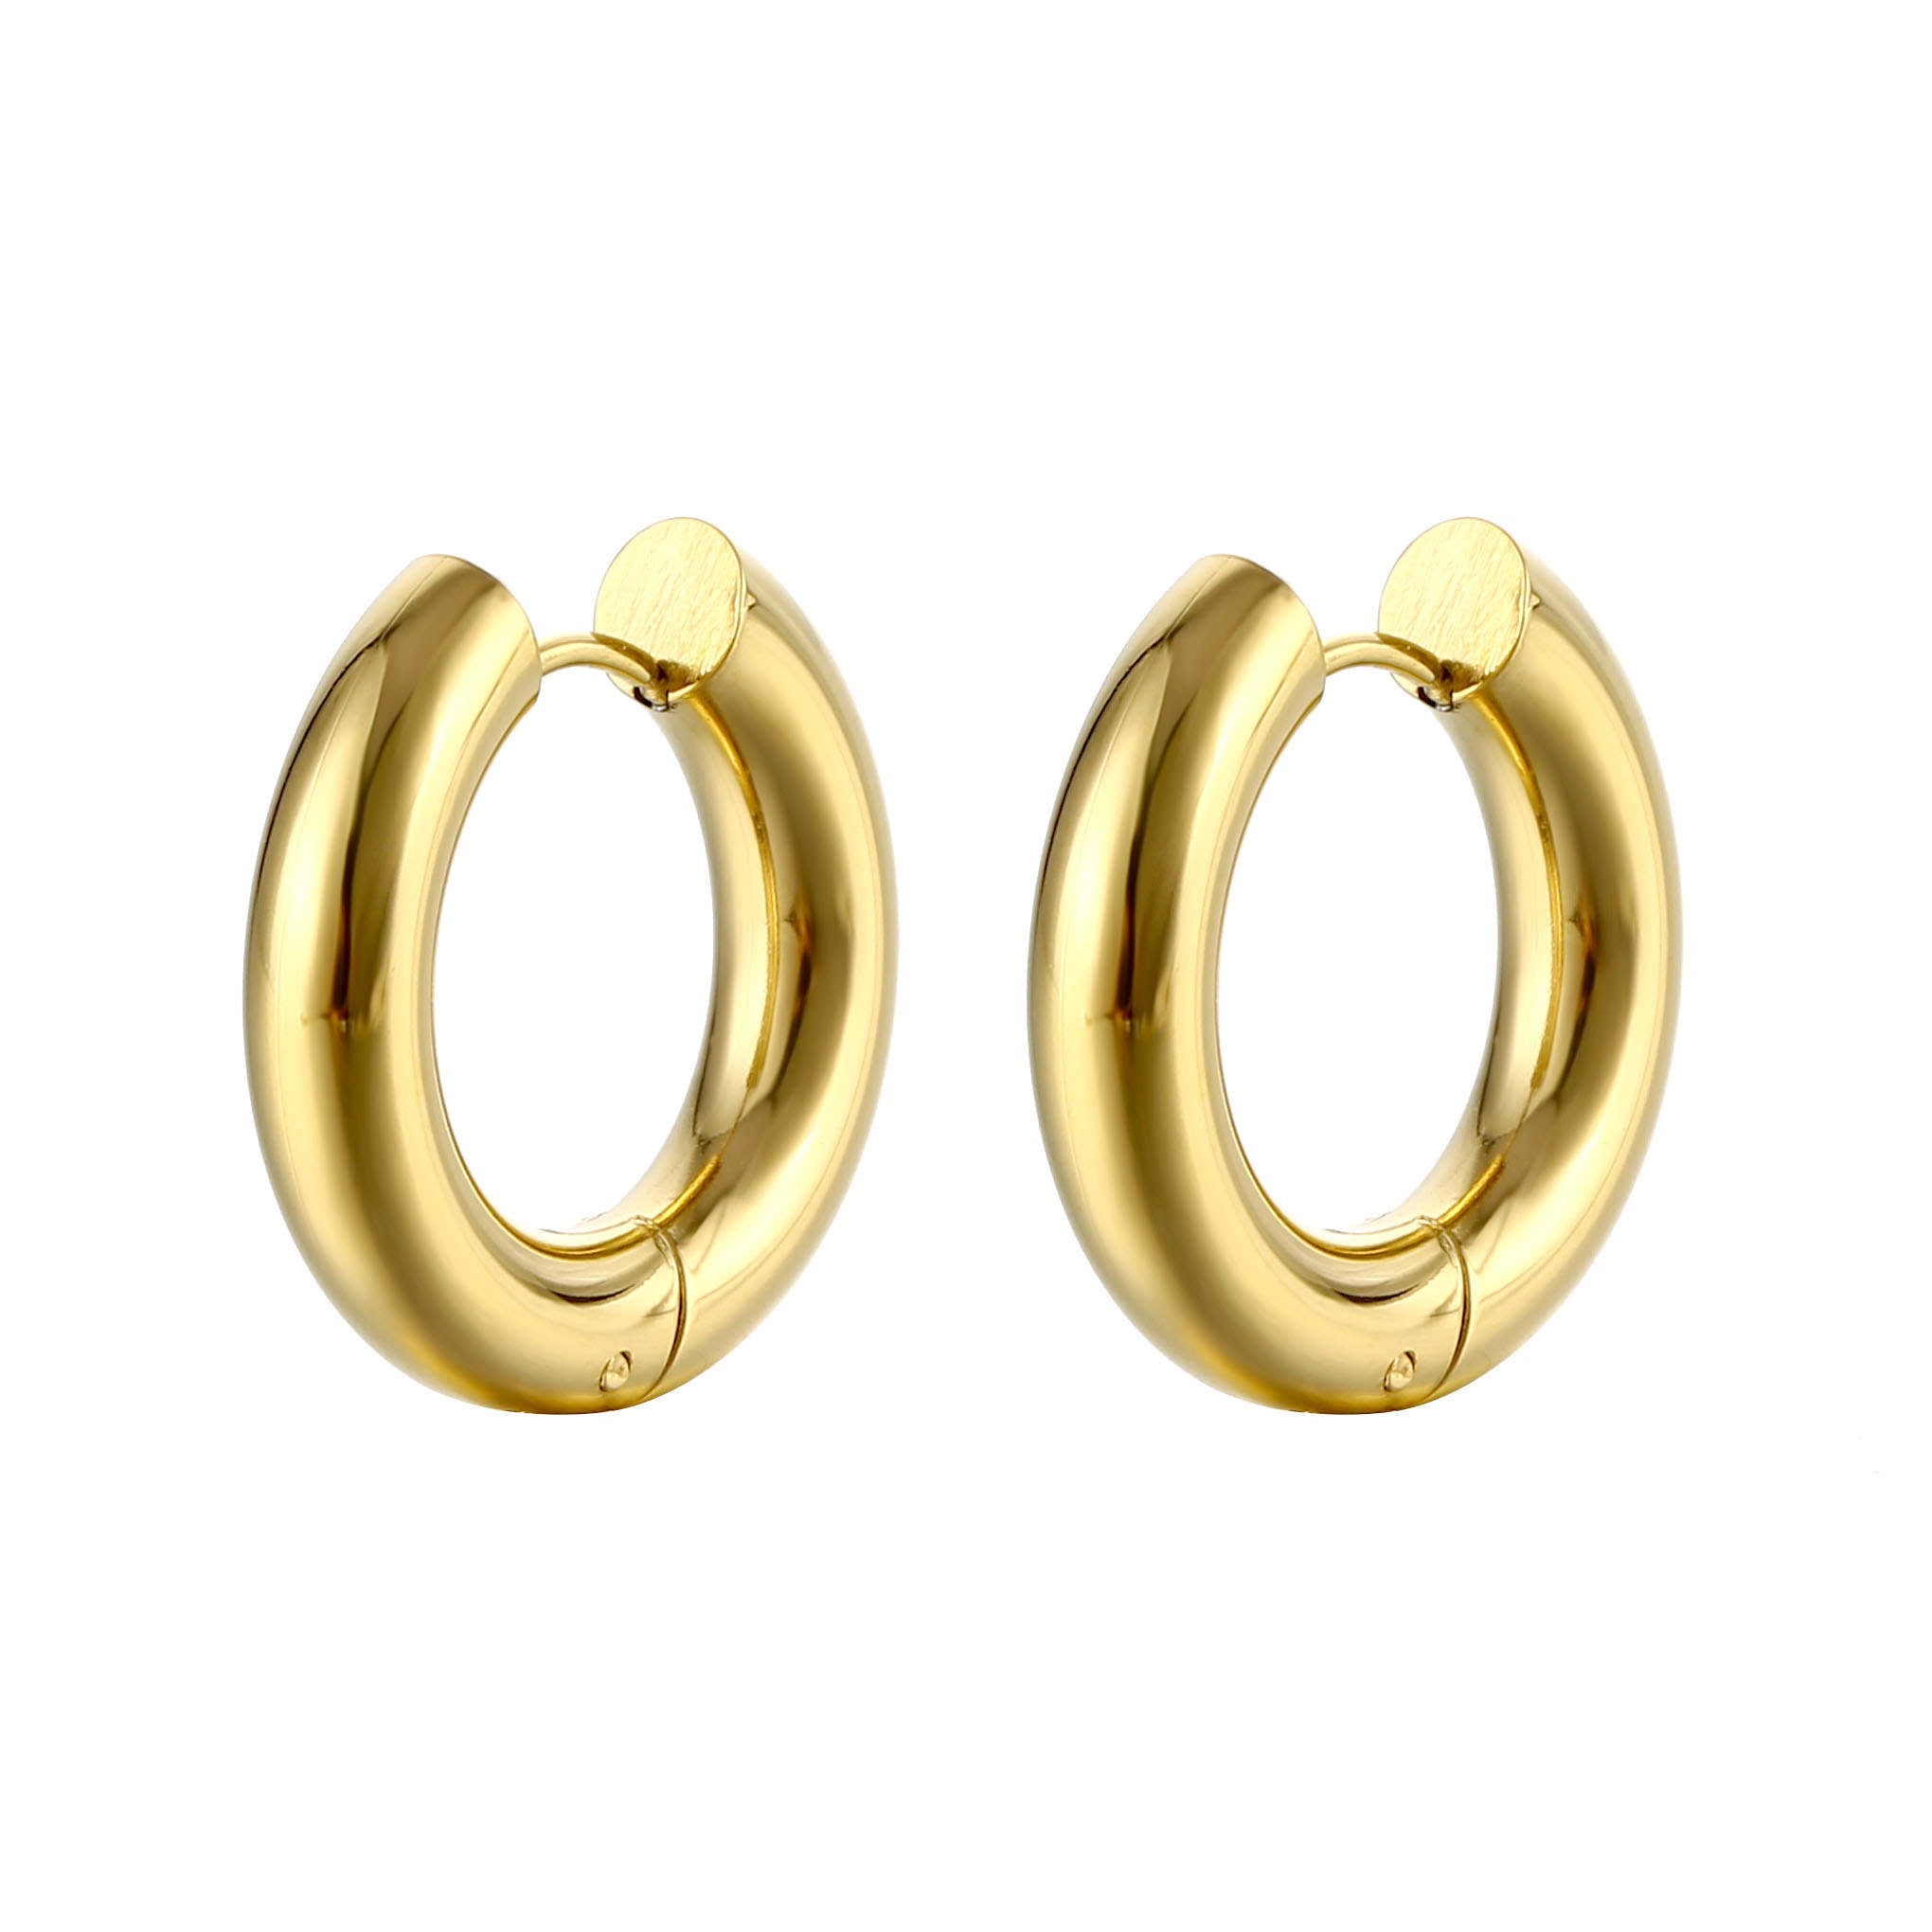 The traditional design of these Esmé hoops exudes a sense of timeless beauty. With their sleek and polished surface, they effortlessly elevate any outfit
Whether it'